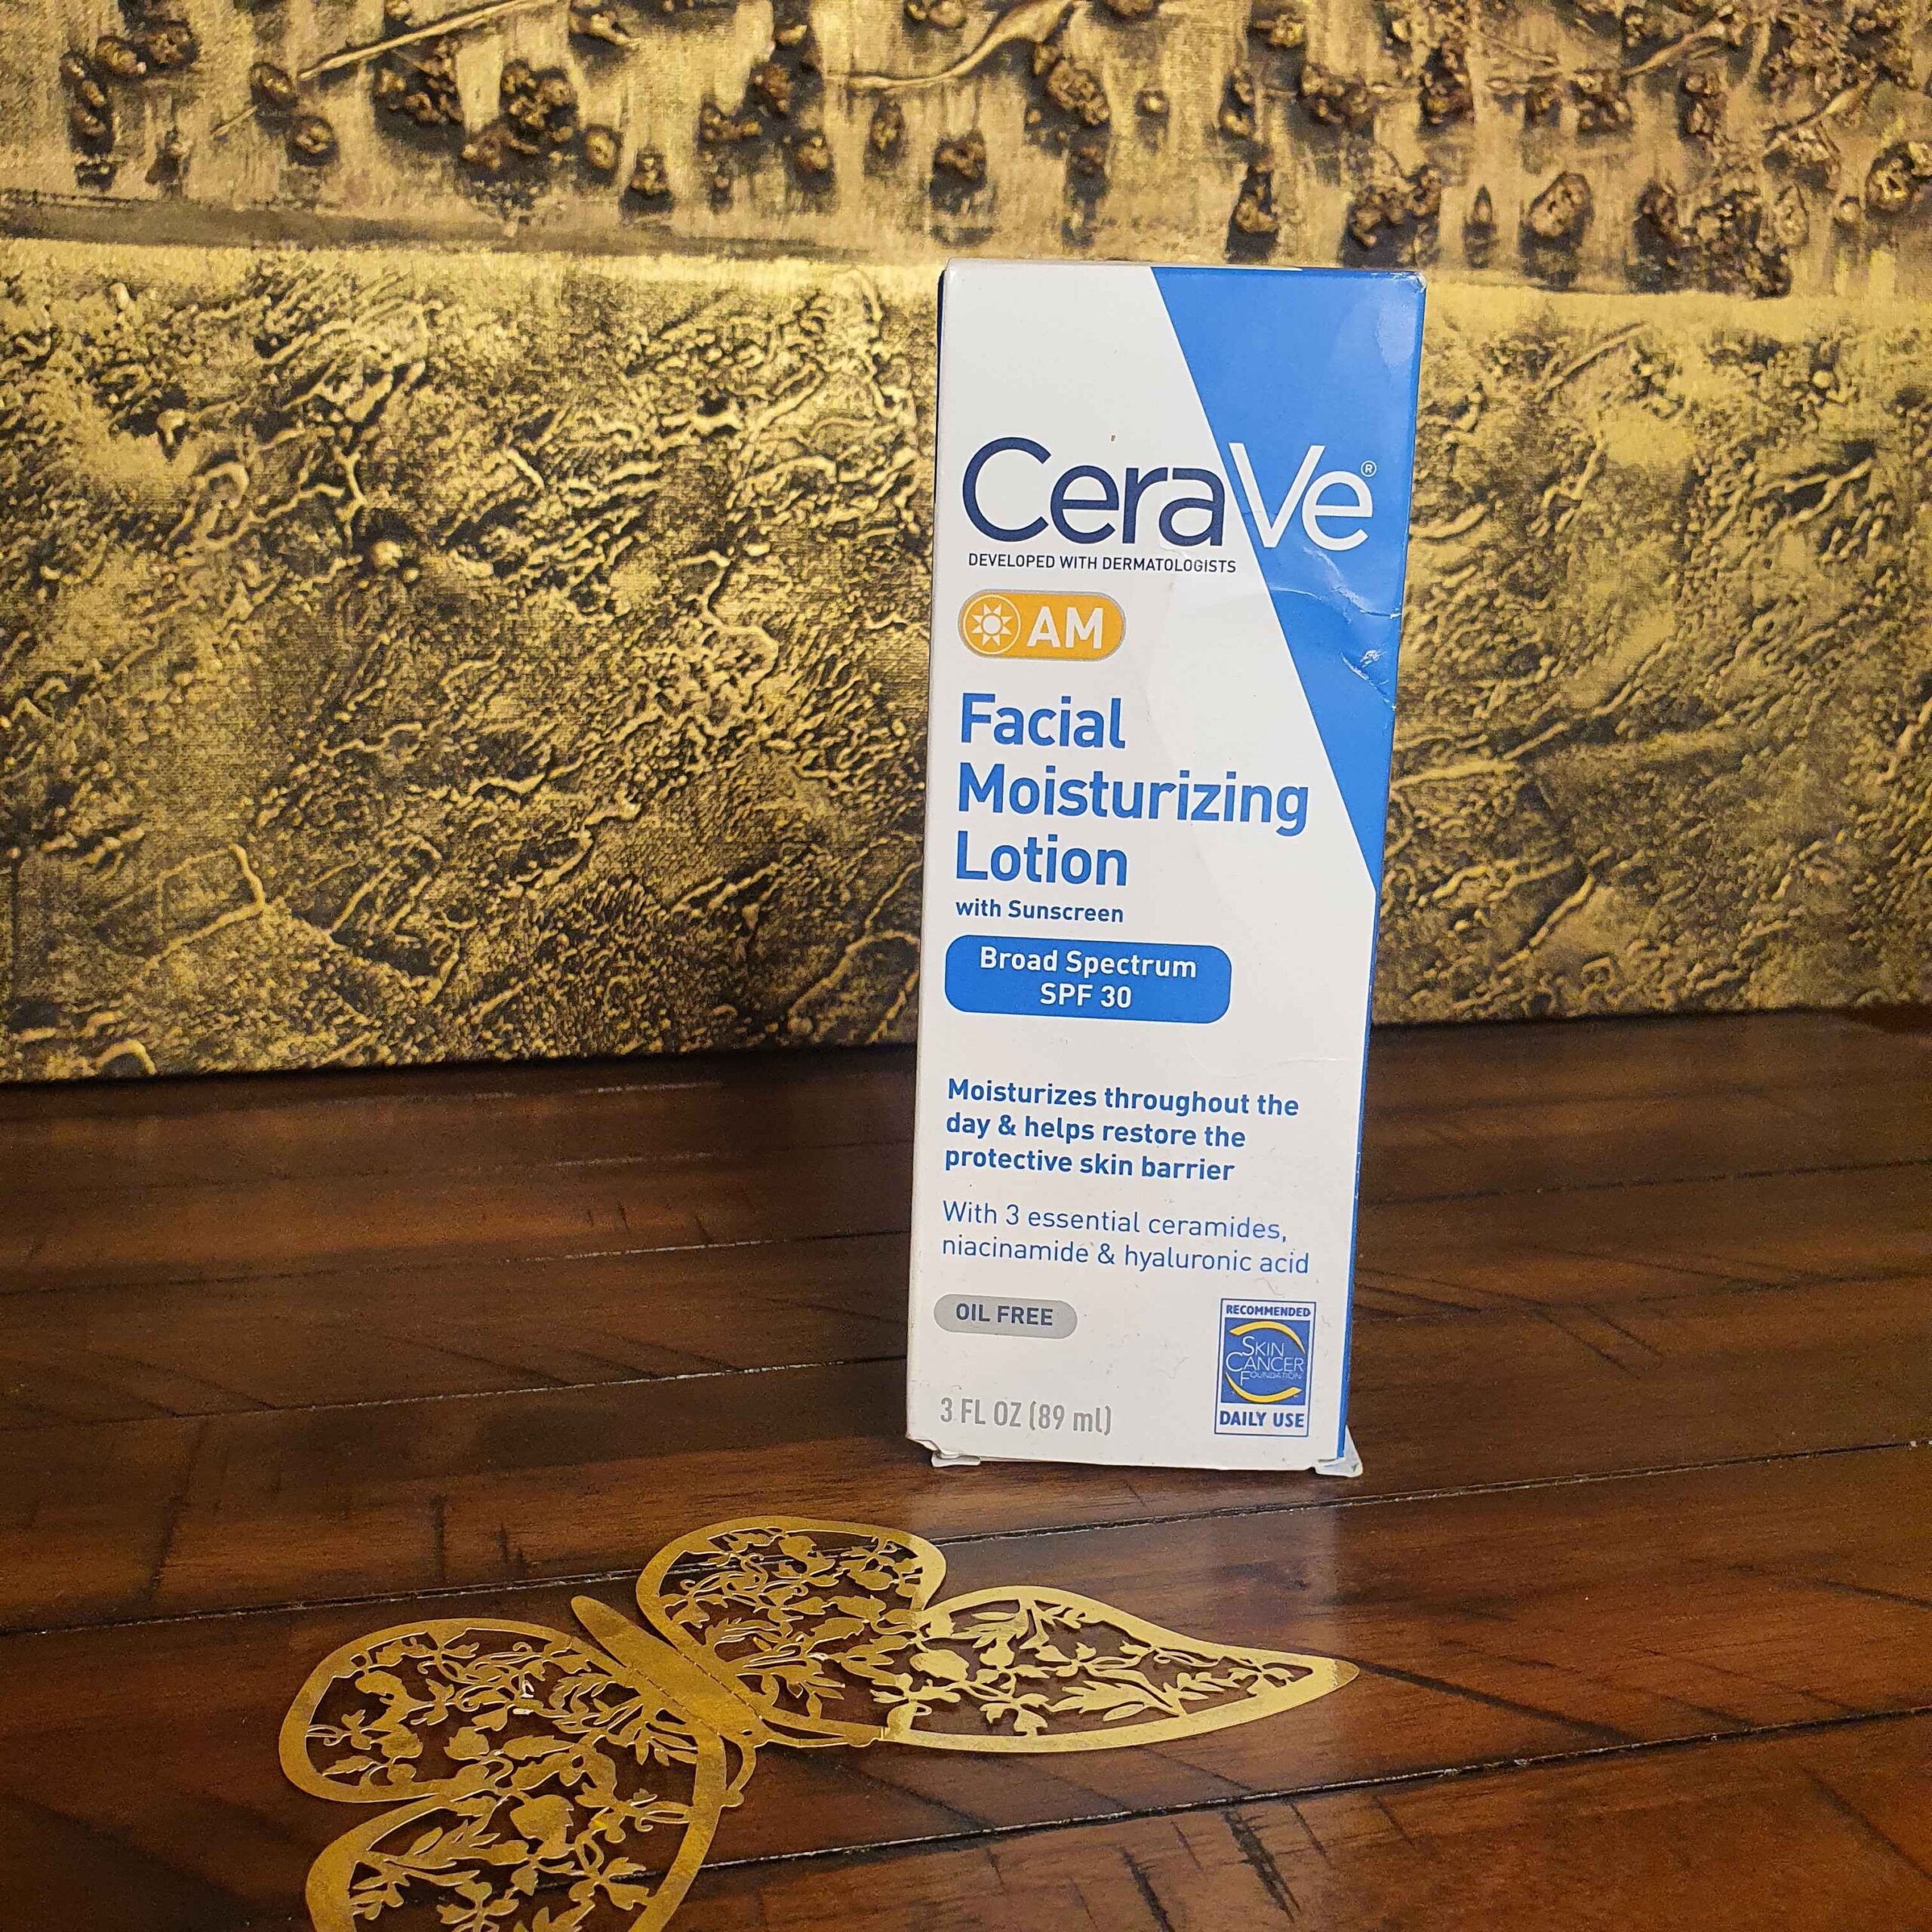 CeraVe AM Facial Moisturizing Lotion with SPF 30 89ml